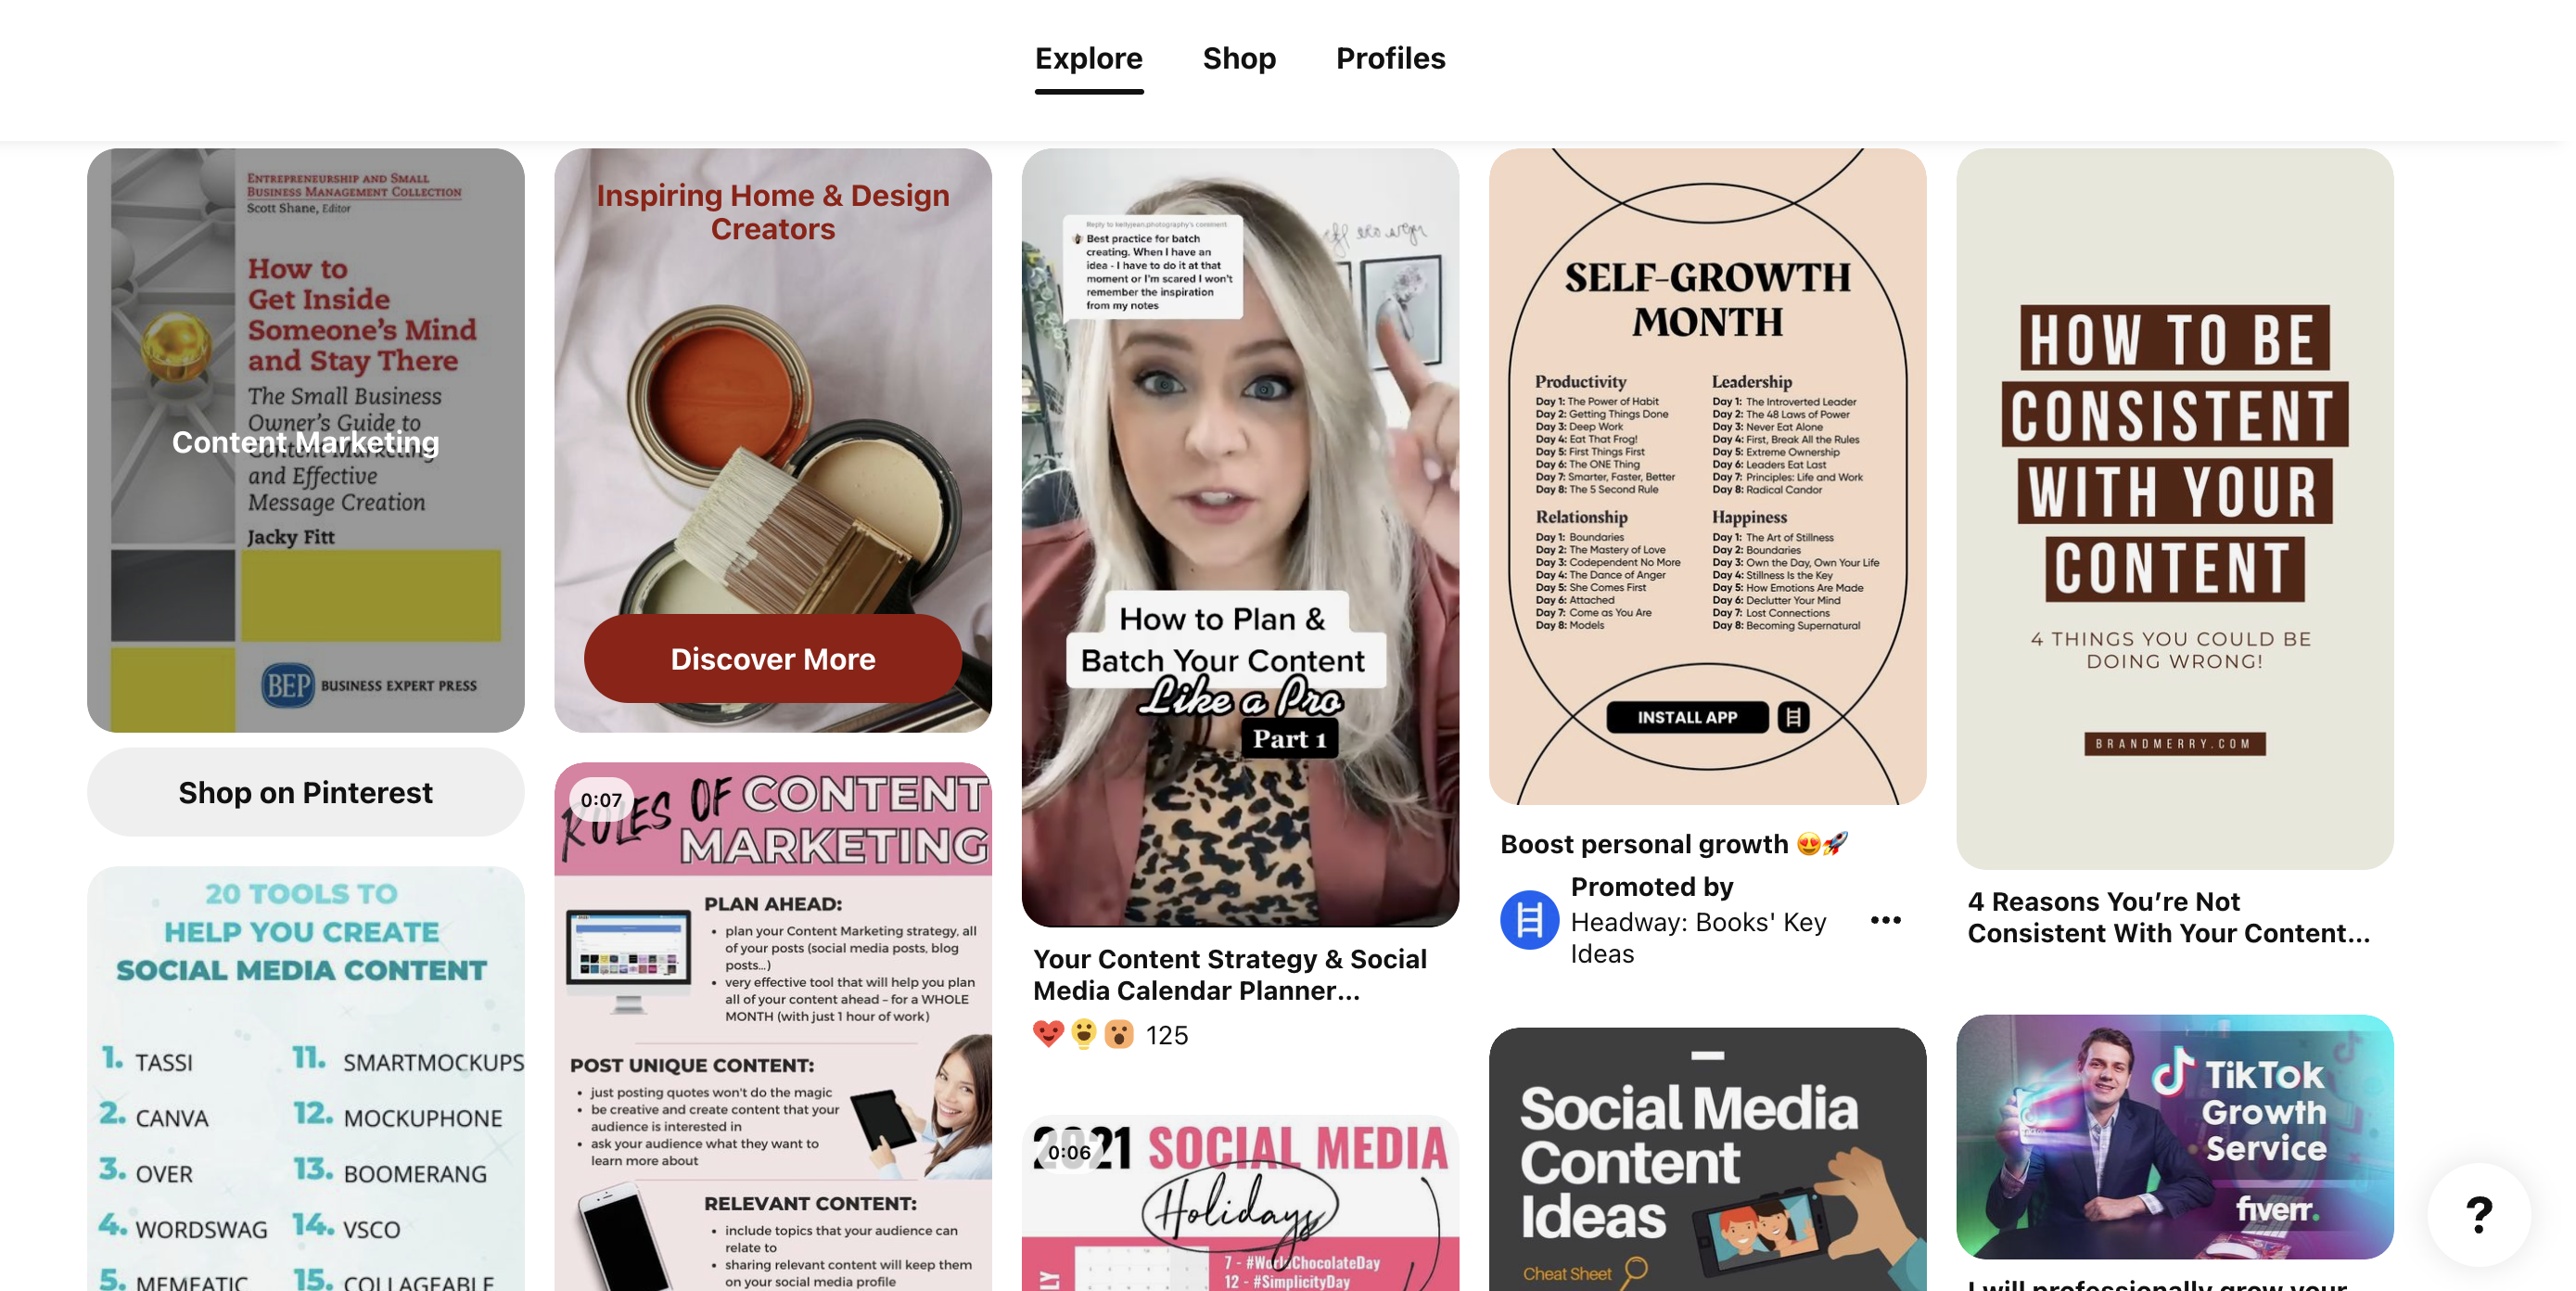 How Can Pinterest Be Used for Marketing?